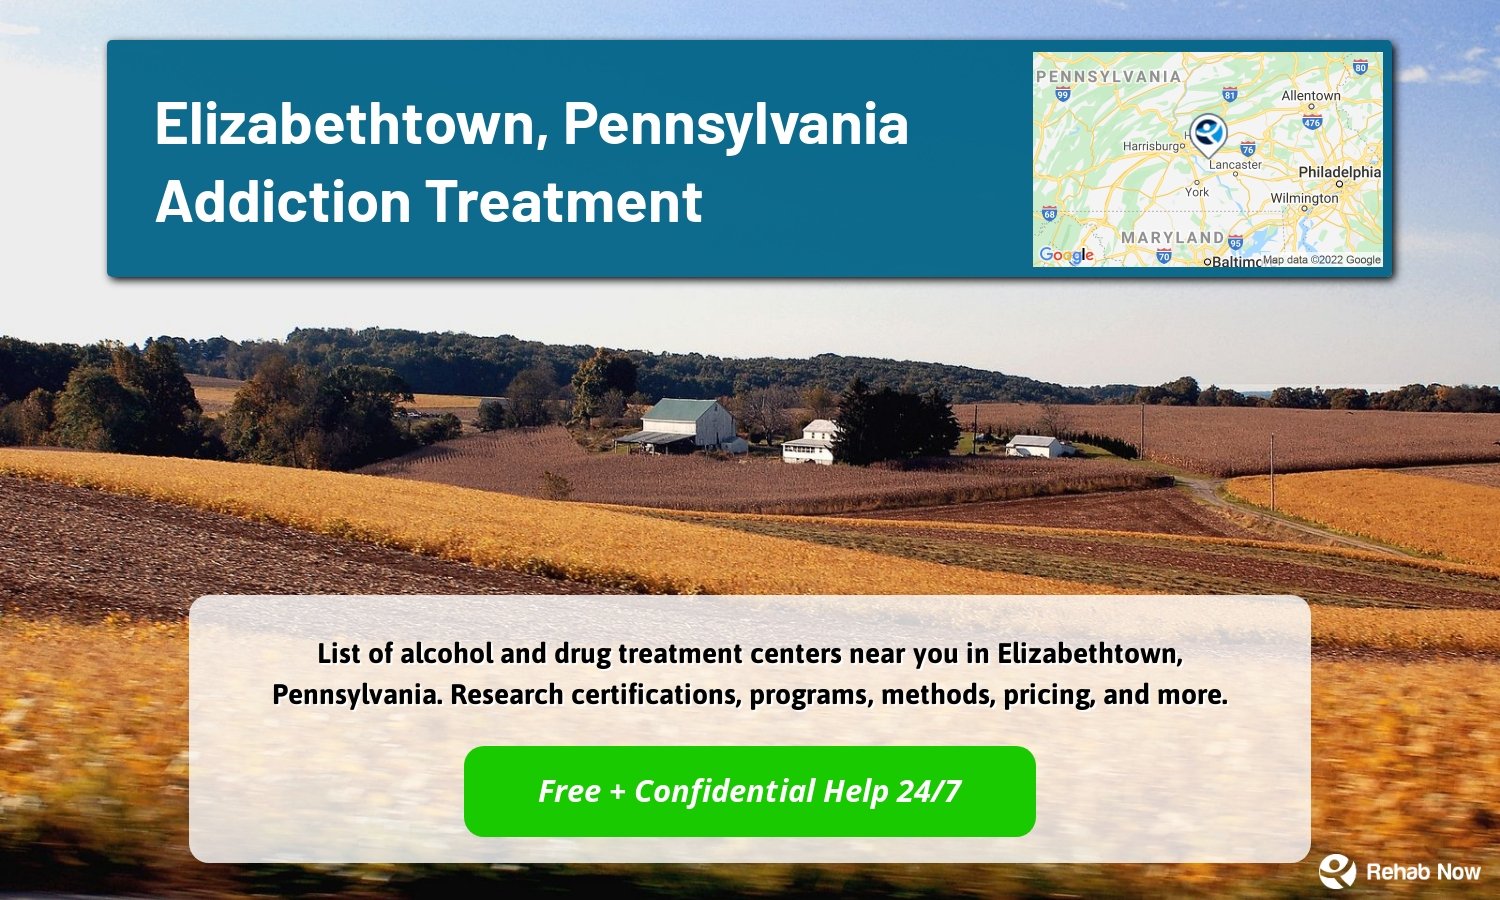 List of alcohol and drug treatment centers near you in Elizabethtown, Pennsylvania. Research certifications, programs, methods, pricing, and more.